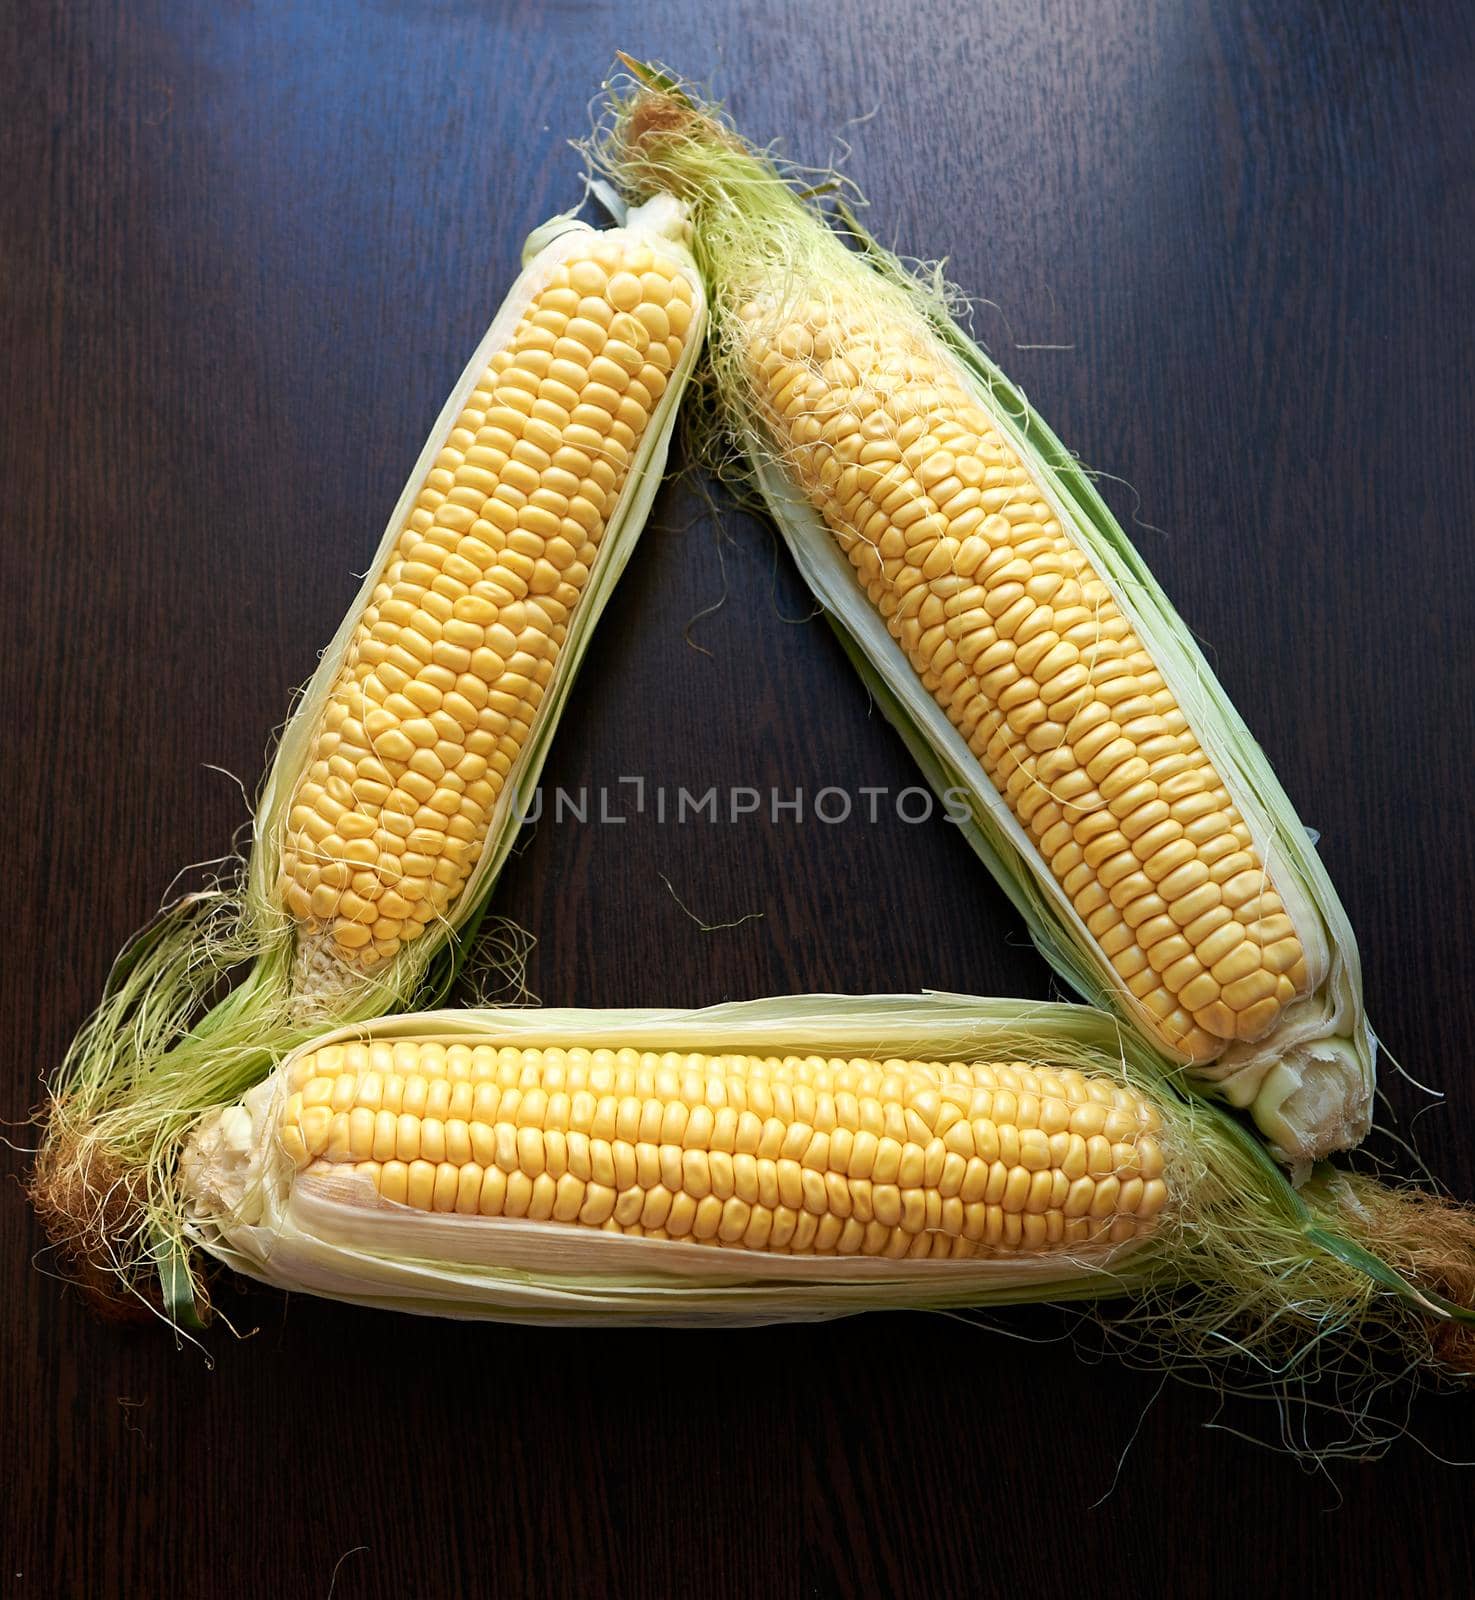 Four golden ears of corn with leaves. Low key. Top view